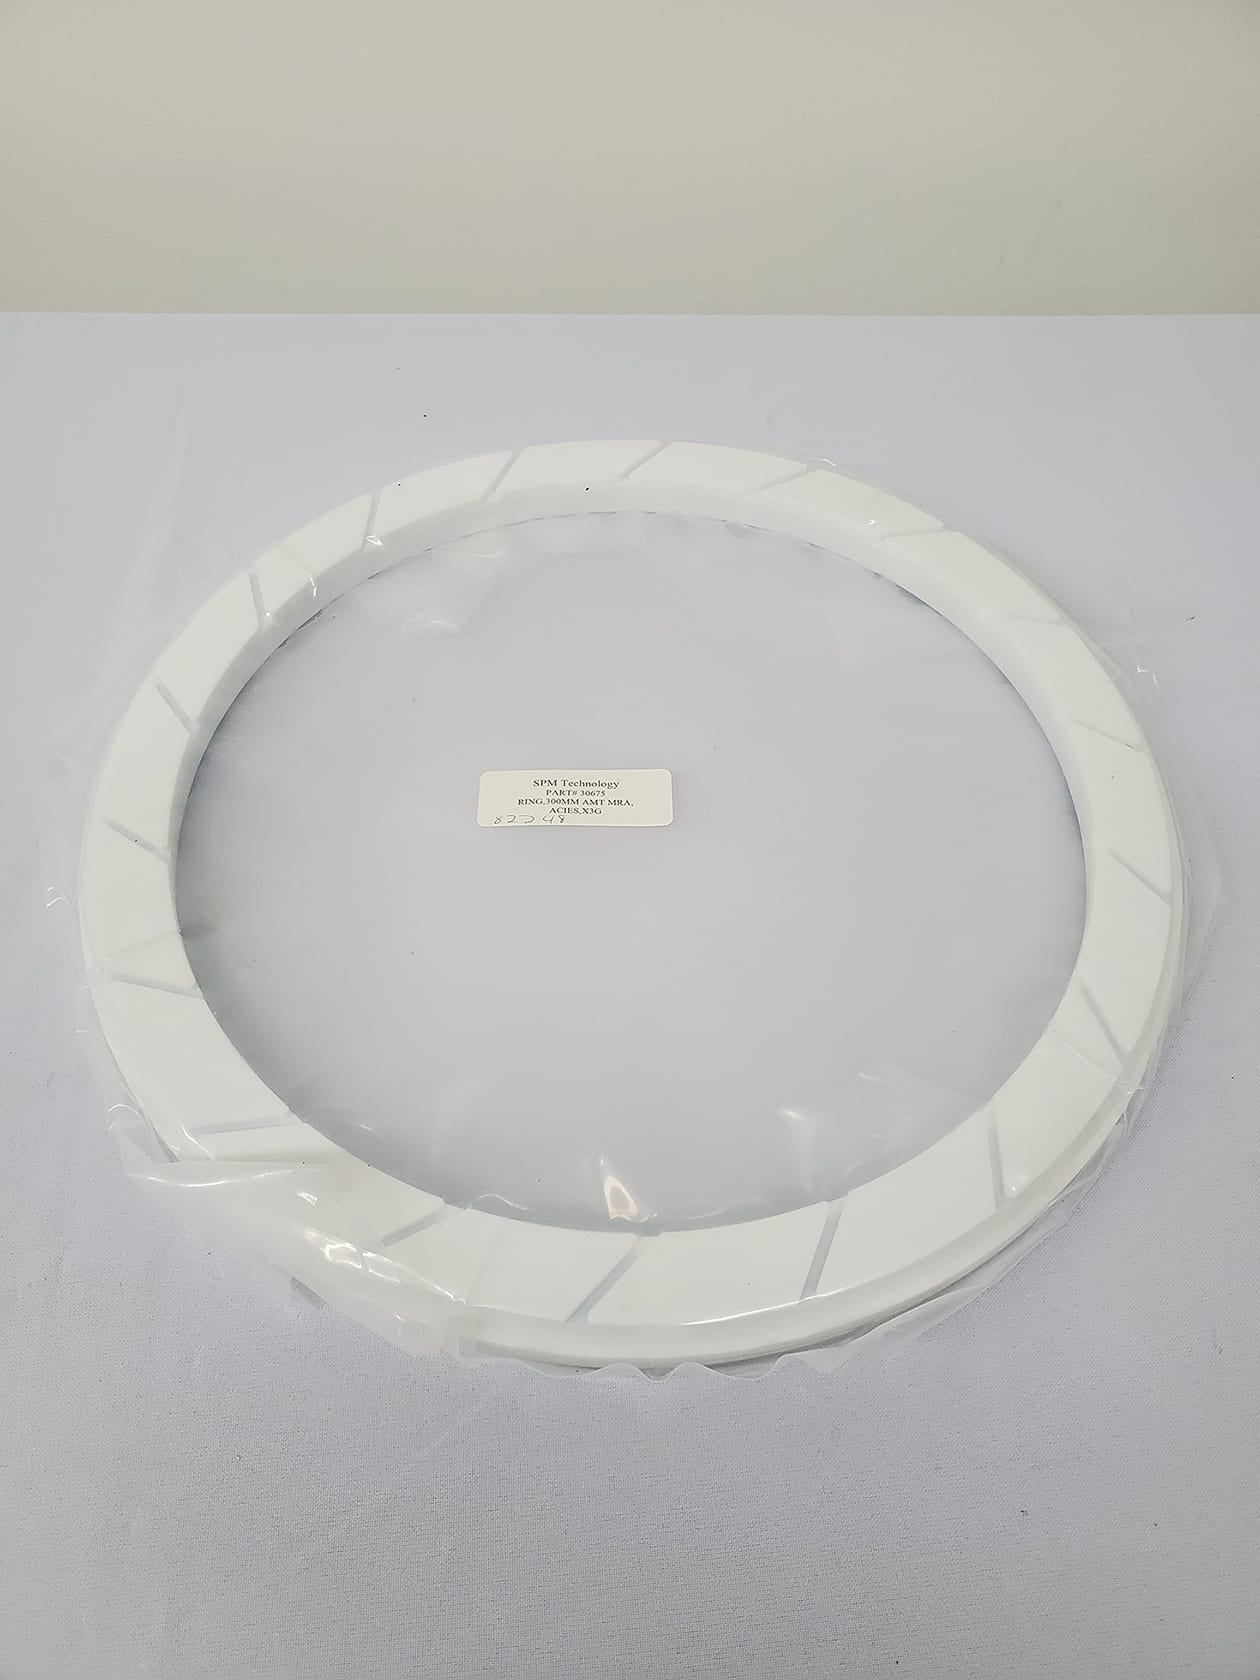 Buy Applied Materials / SPM Technology-Retaining Ring AMT 